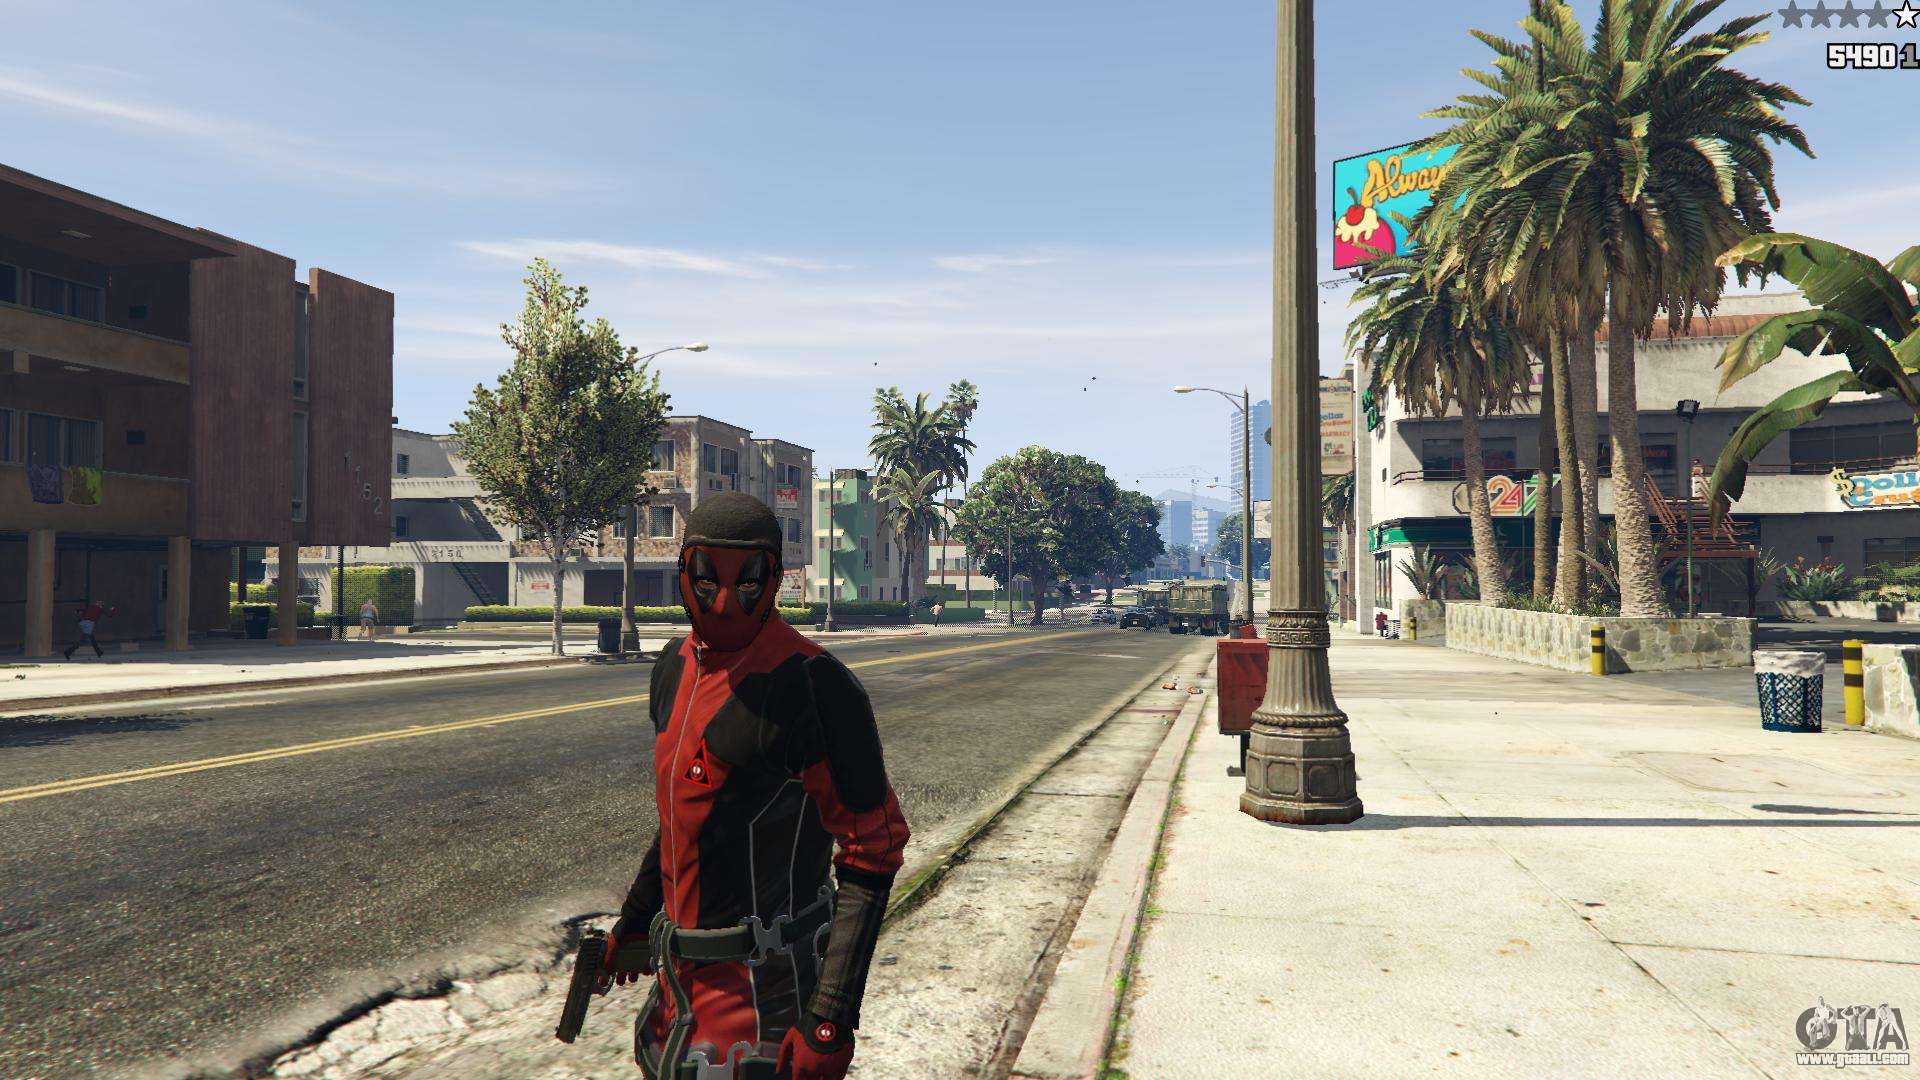 how to buy mods for gta 5